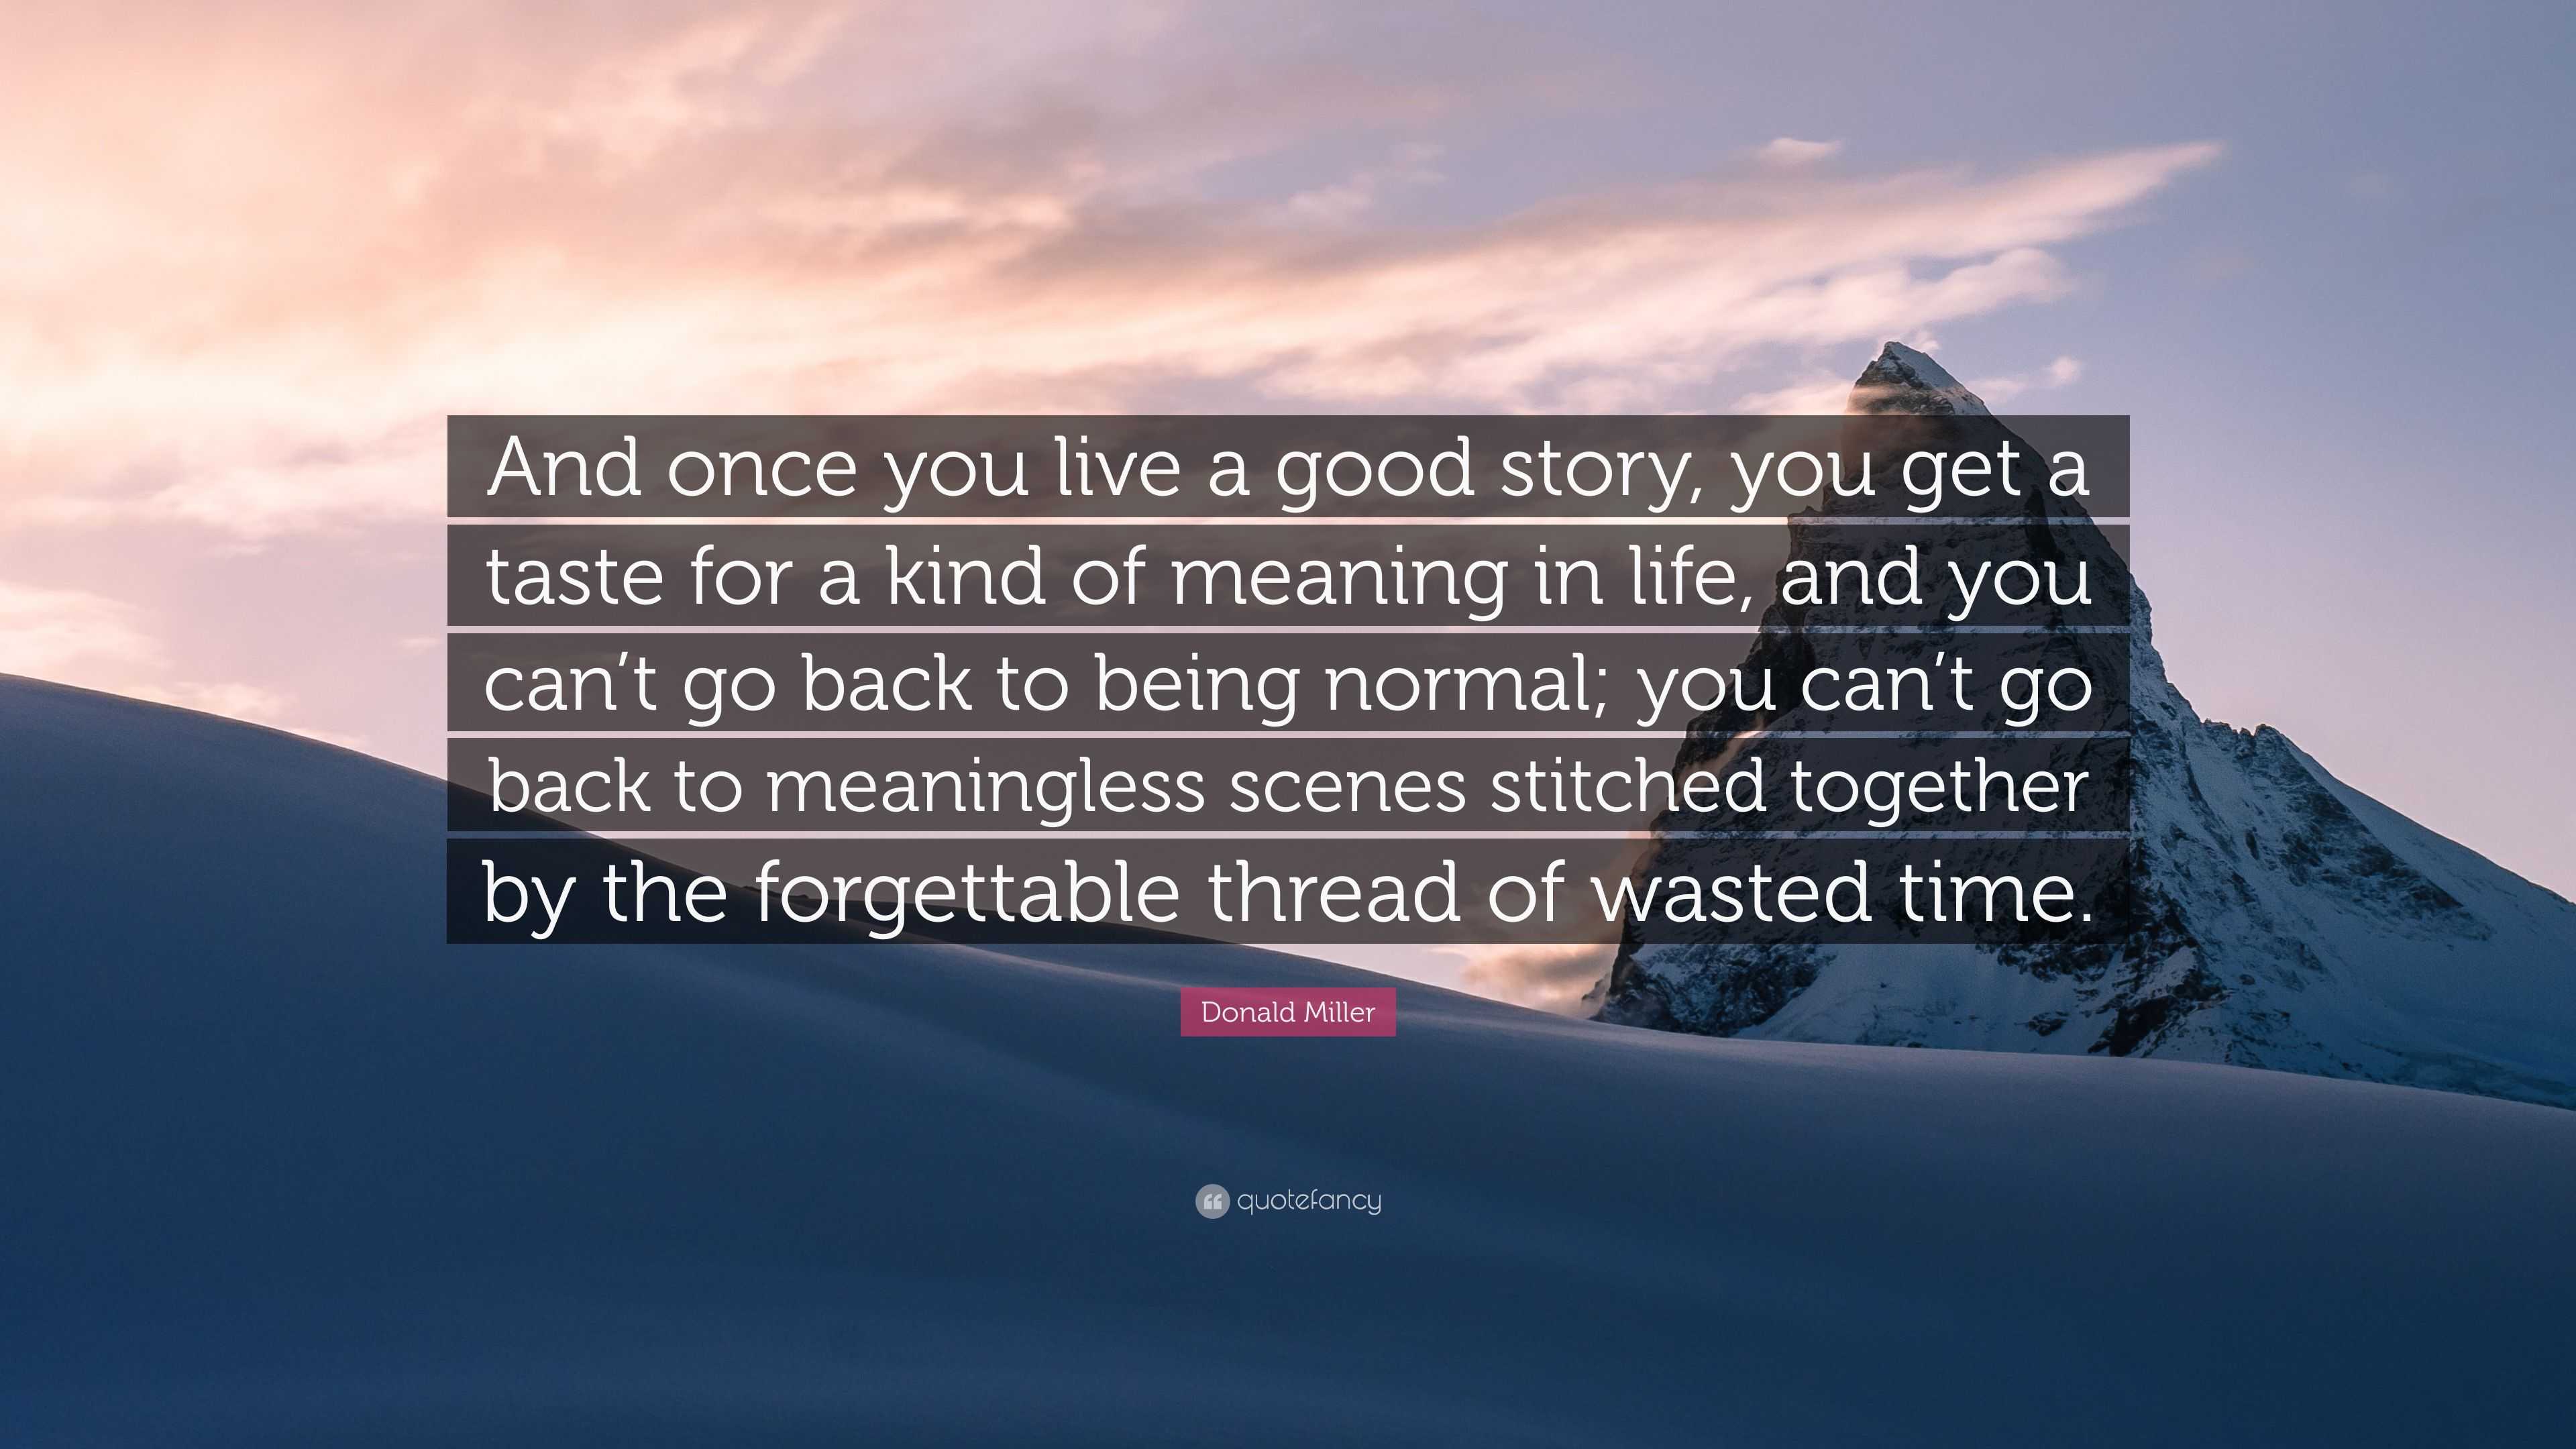 Donald Miller Quote: "And once you live a good story, you get a taste for a kind of meaning in ...